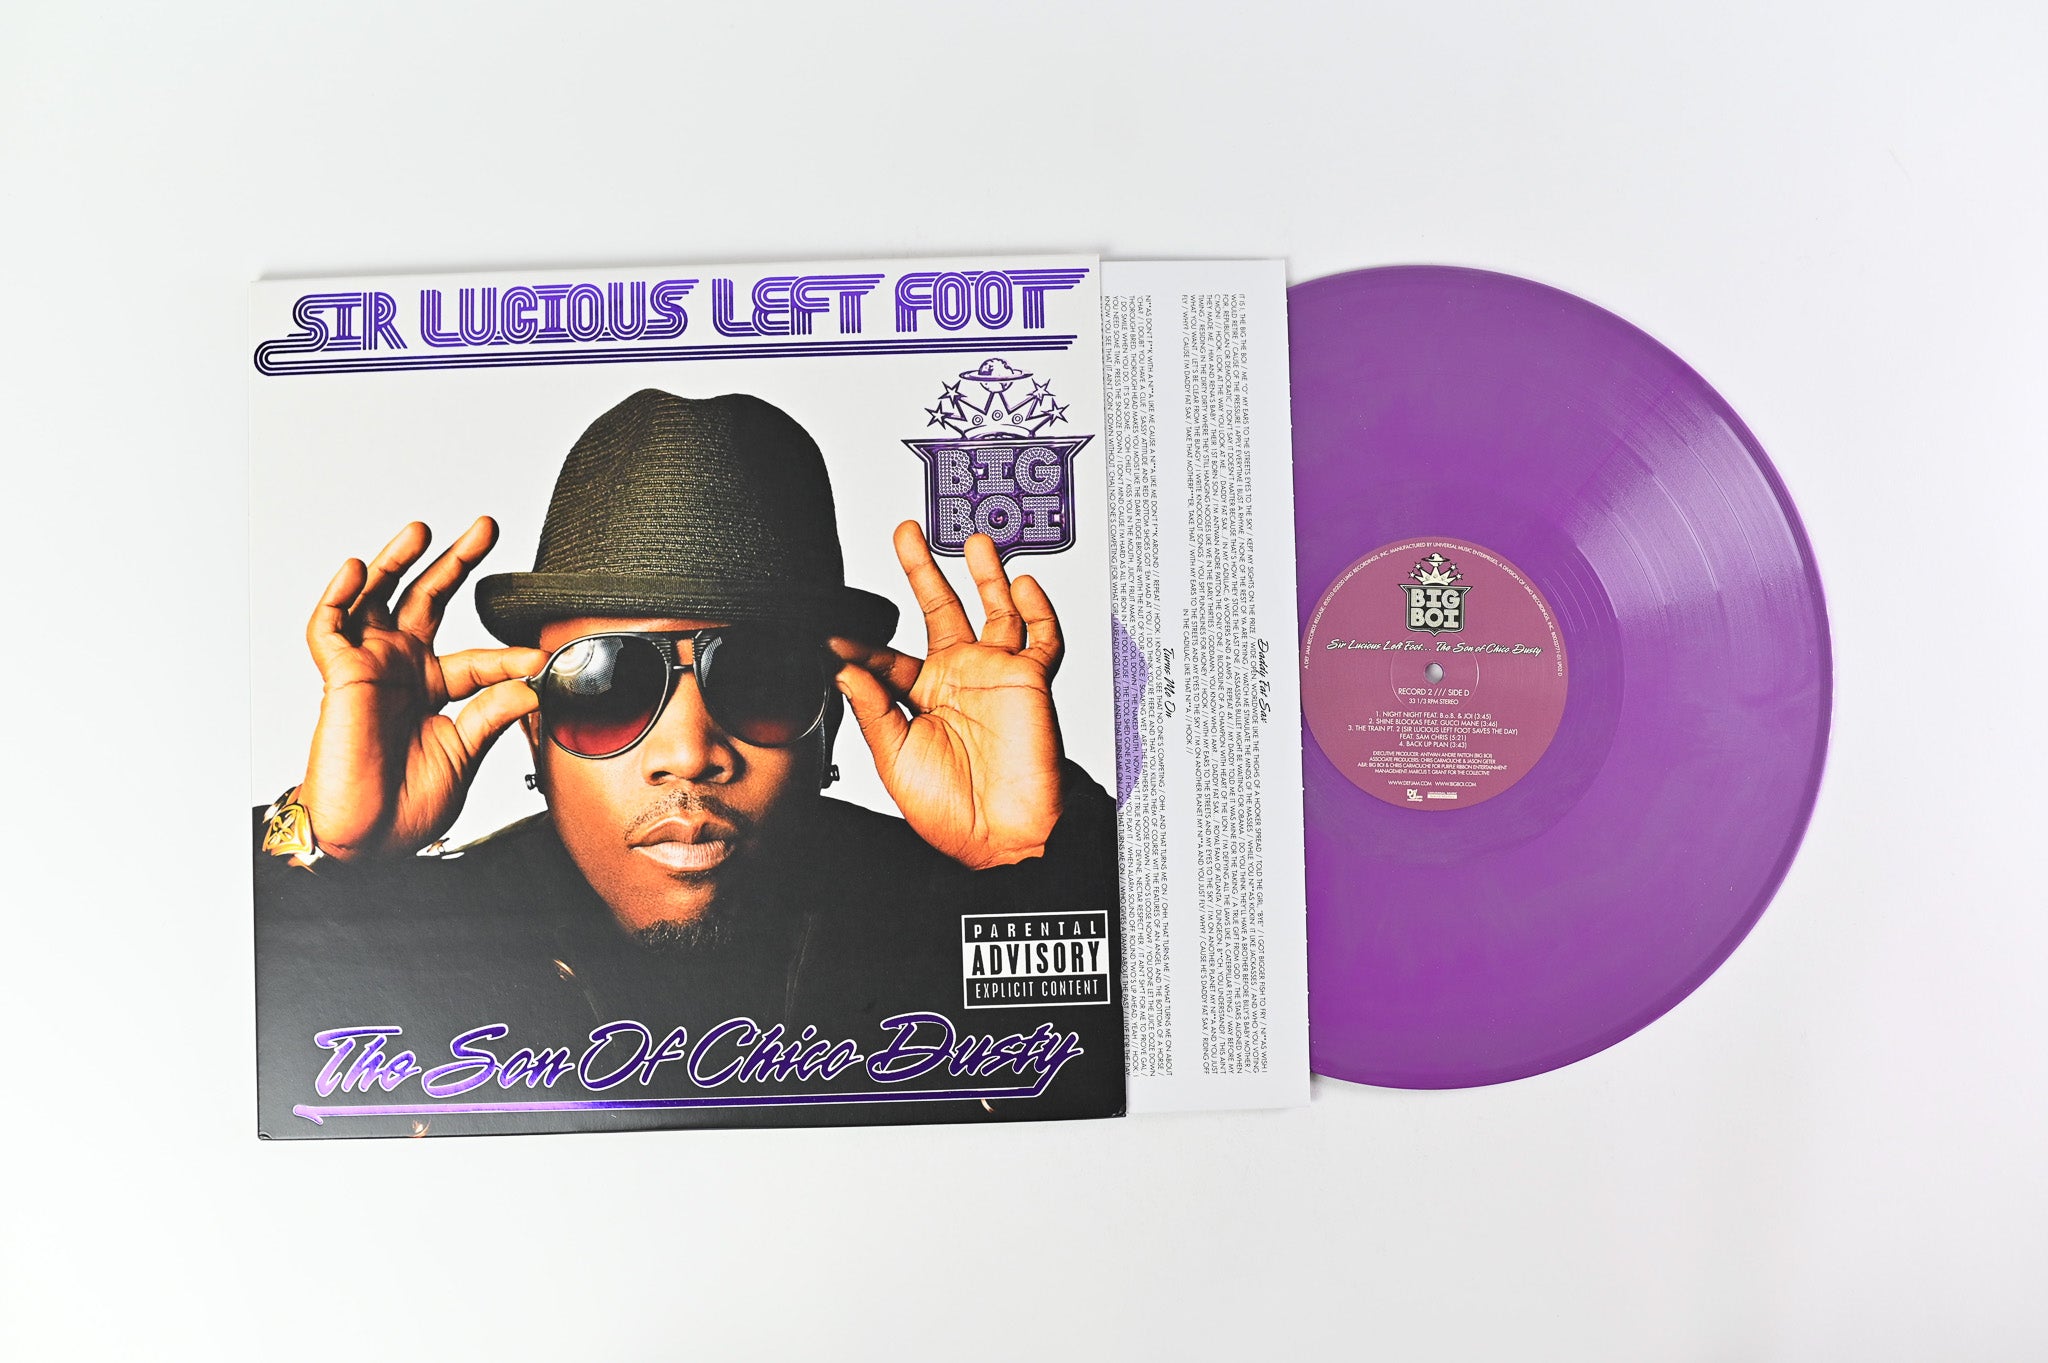 Big Boi - Sir Lucious Left Foot... The Son Of Chico Dusty Reissue on Def Jam Recordings Vinyl Me, Please Purple/Silver Swirl Vinyl